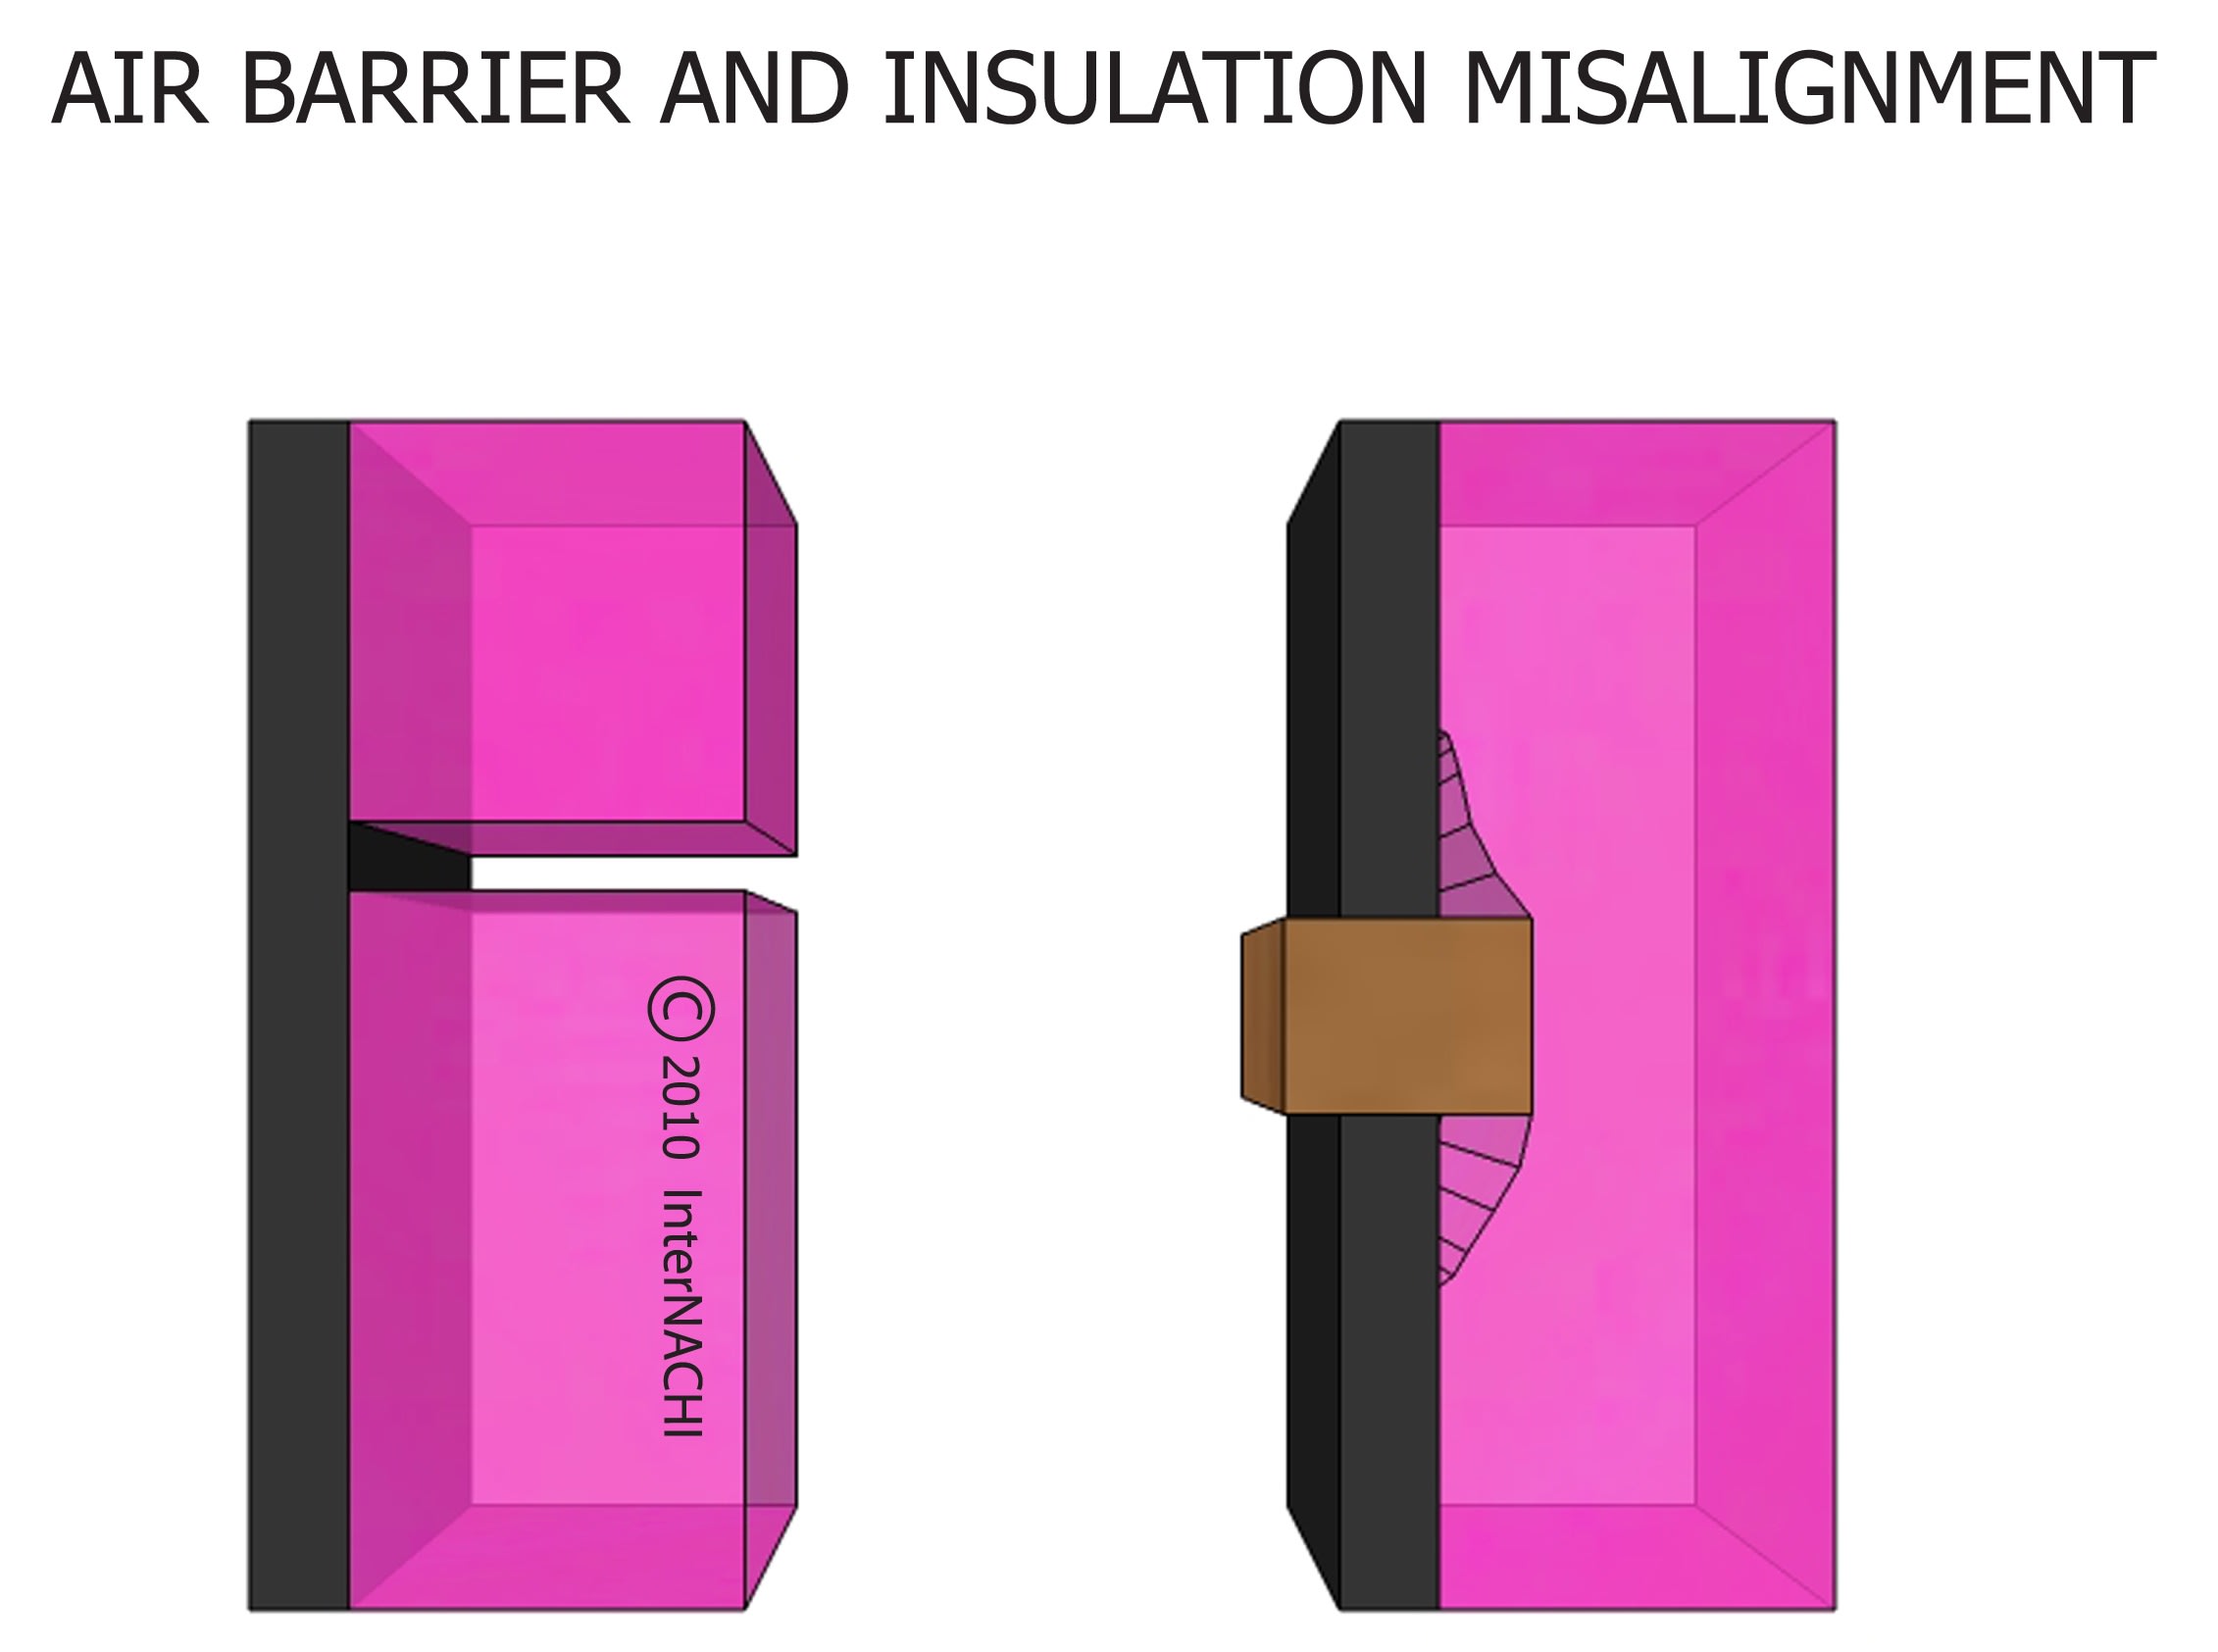 Air barrier and insulation misalignment.